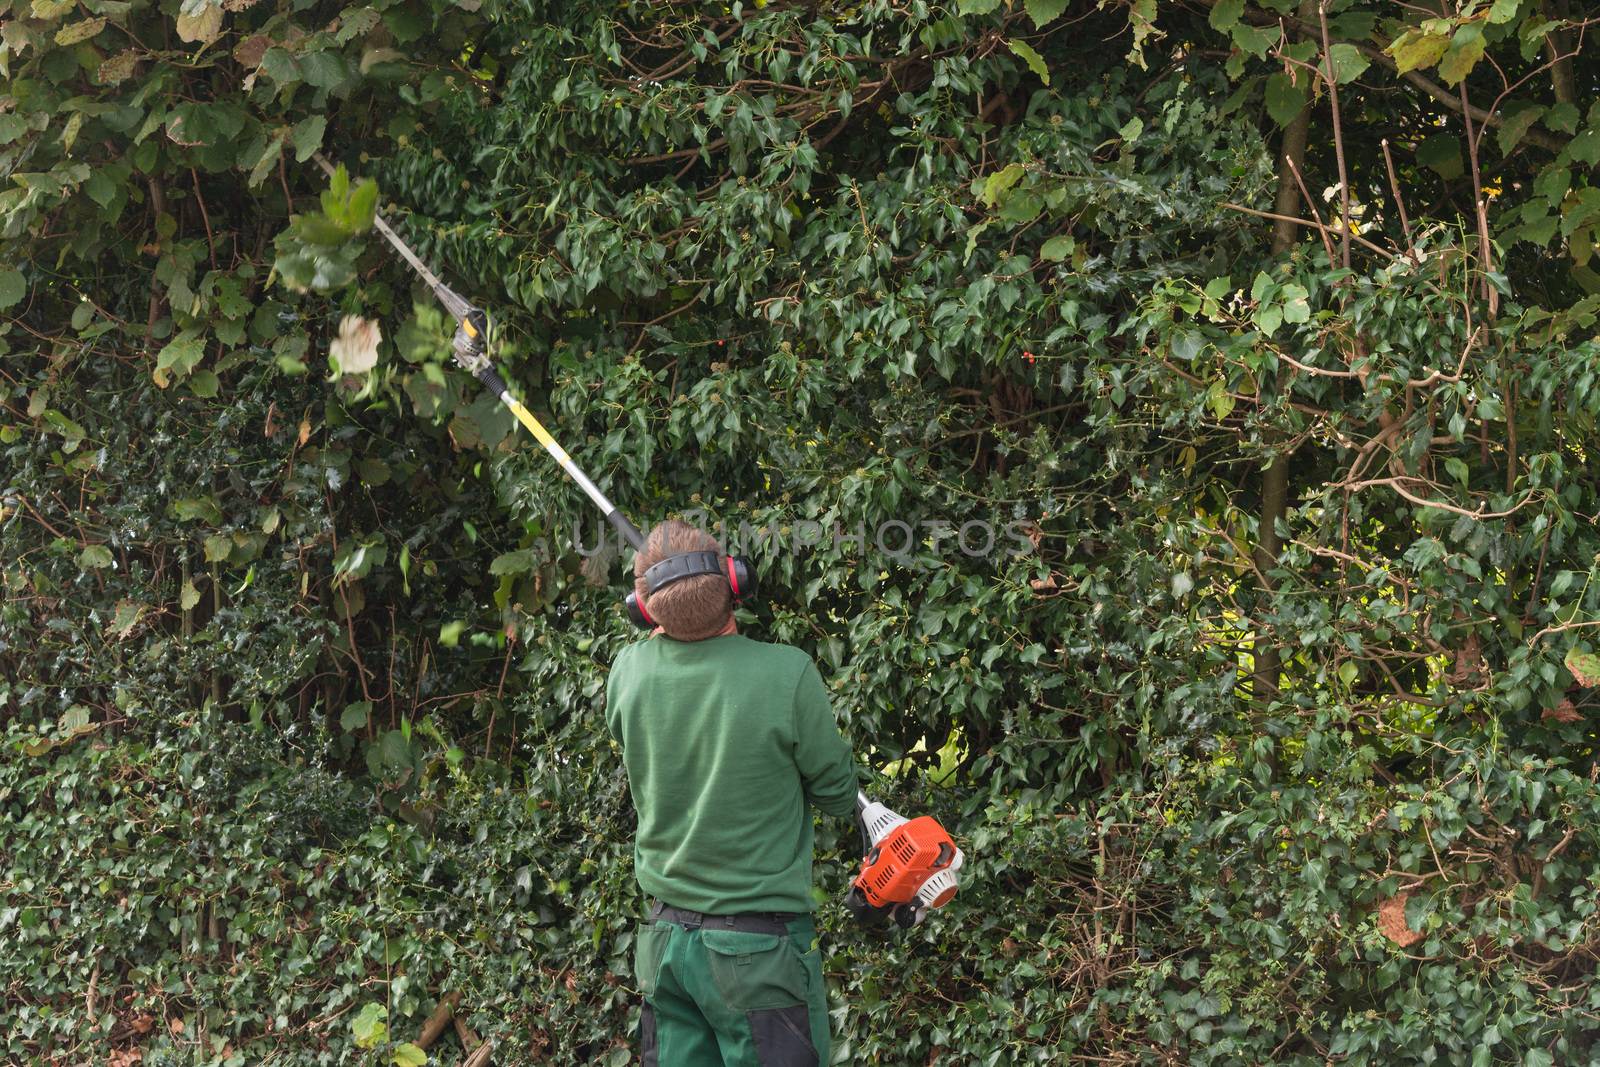 Professional hedges cutting       by JFsPic